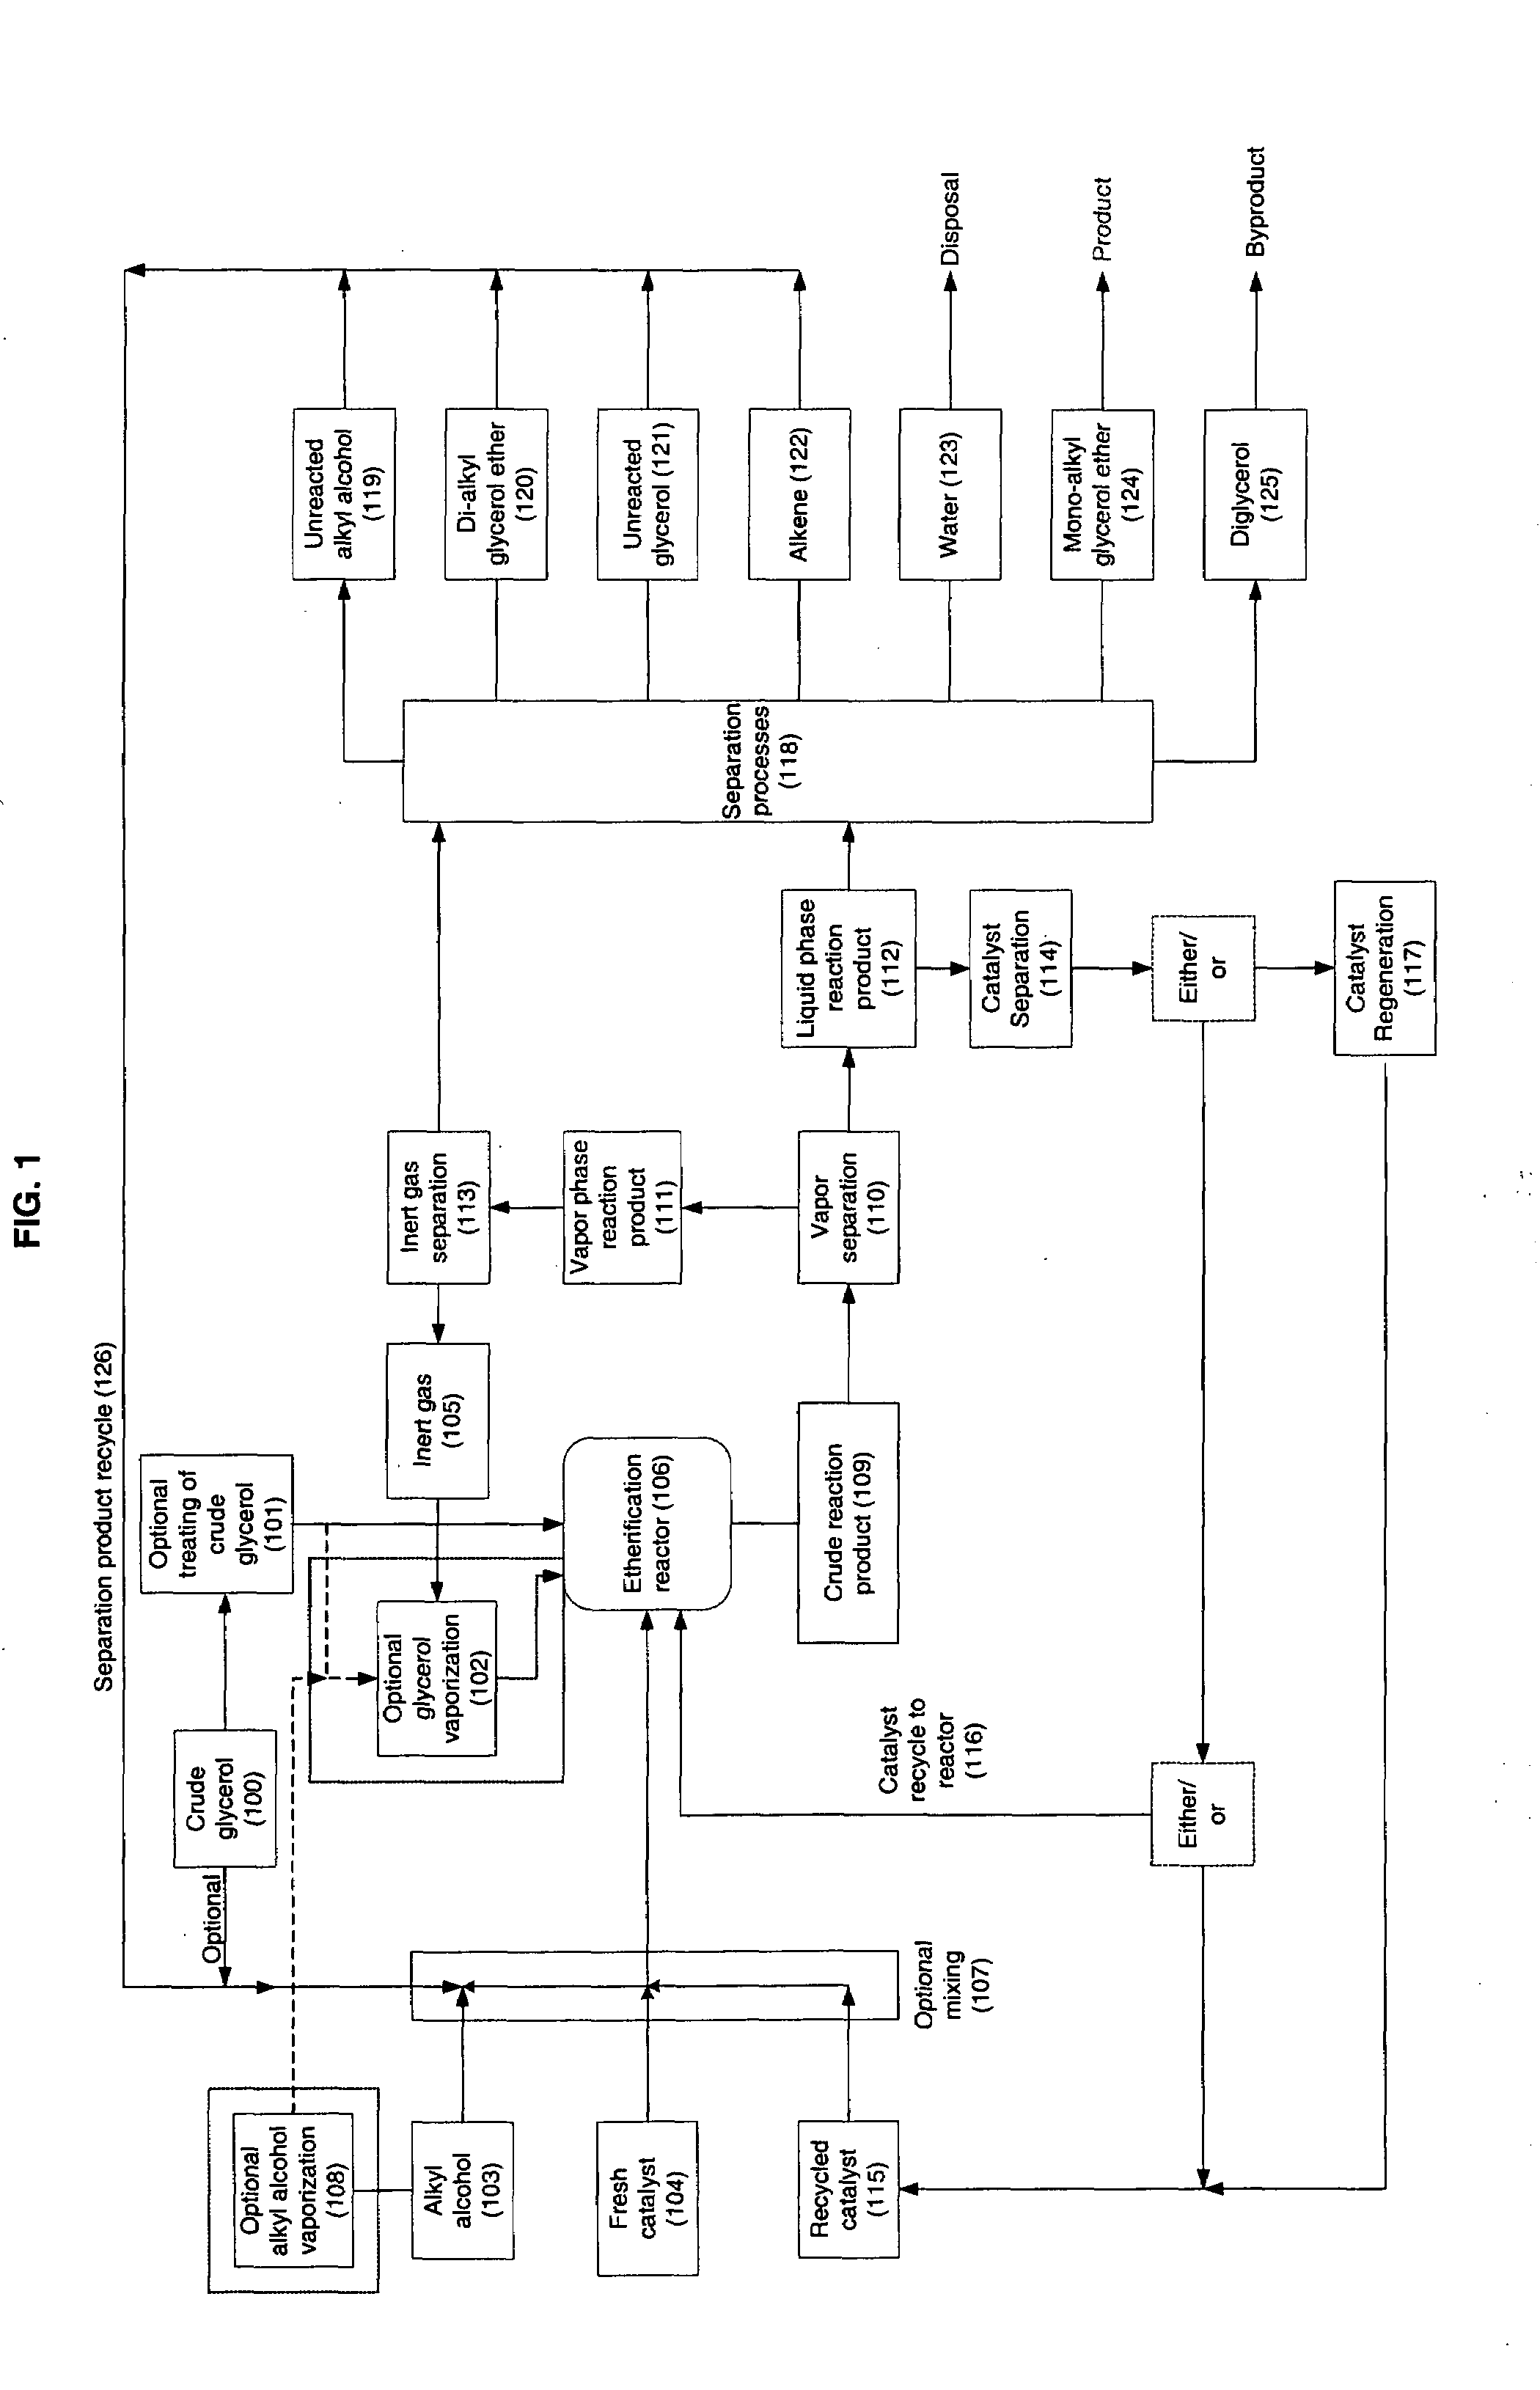 Processes for converting glycerol to glycerol ethers